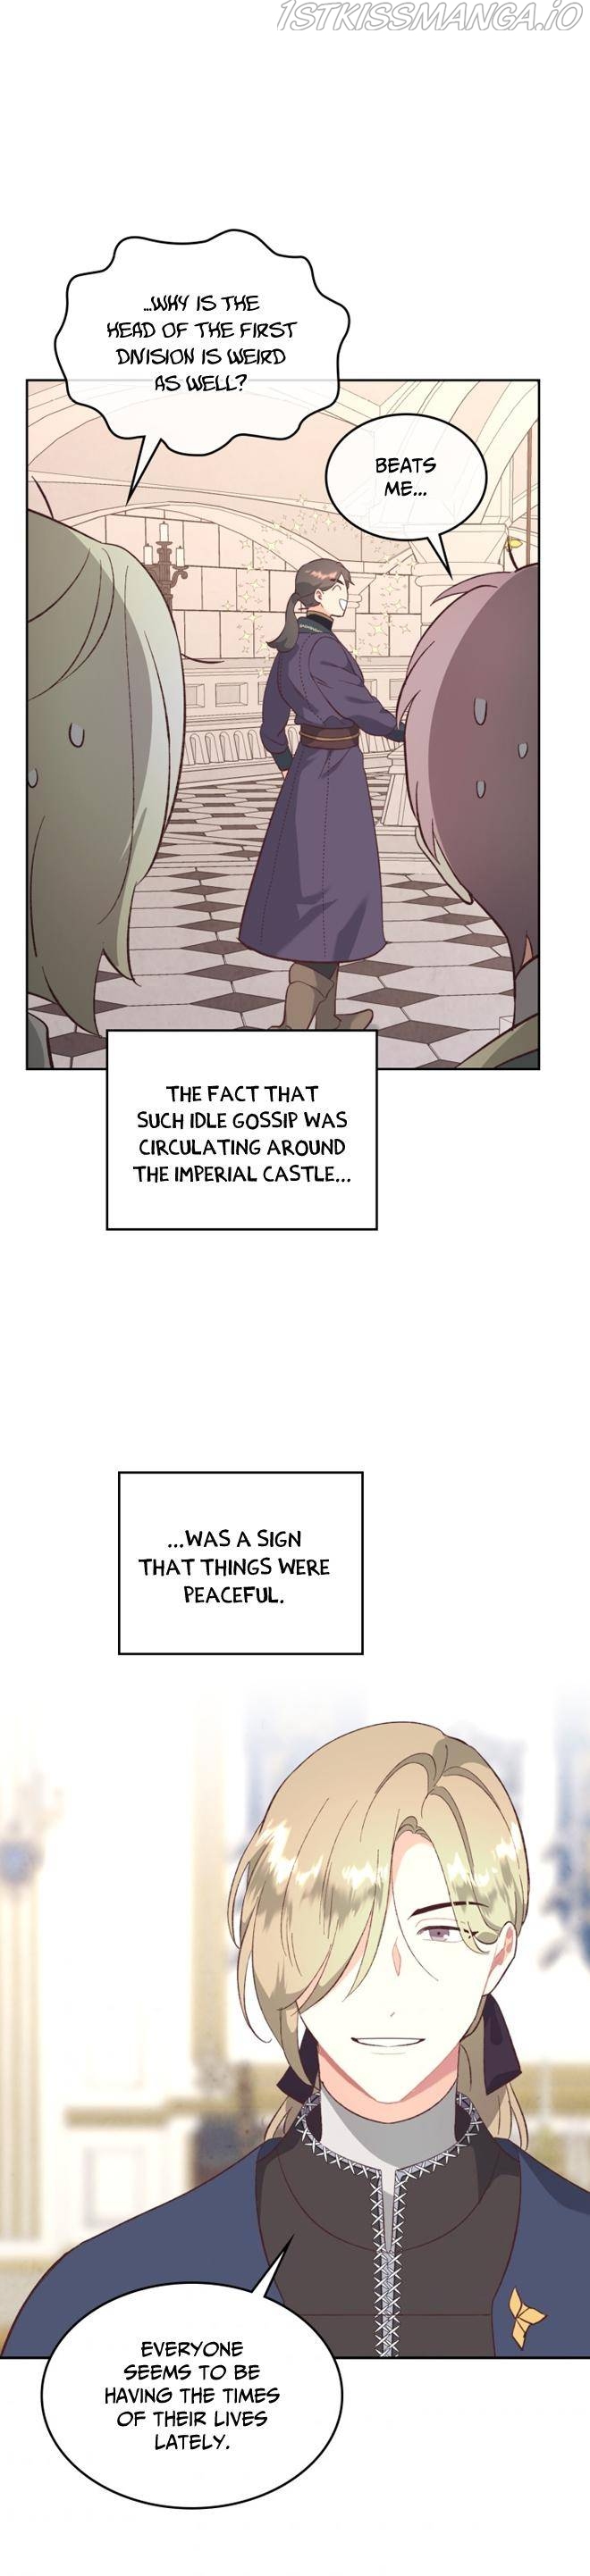 Emperor And The Female Knight ( The King and His Knight ) Chapter 130 - Page 4